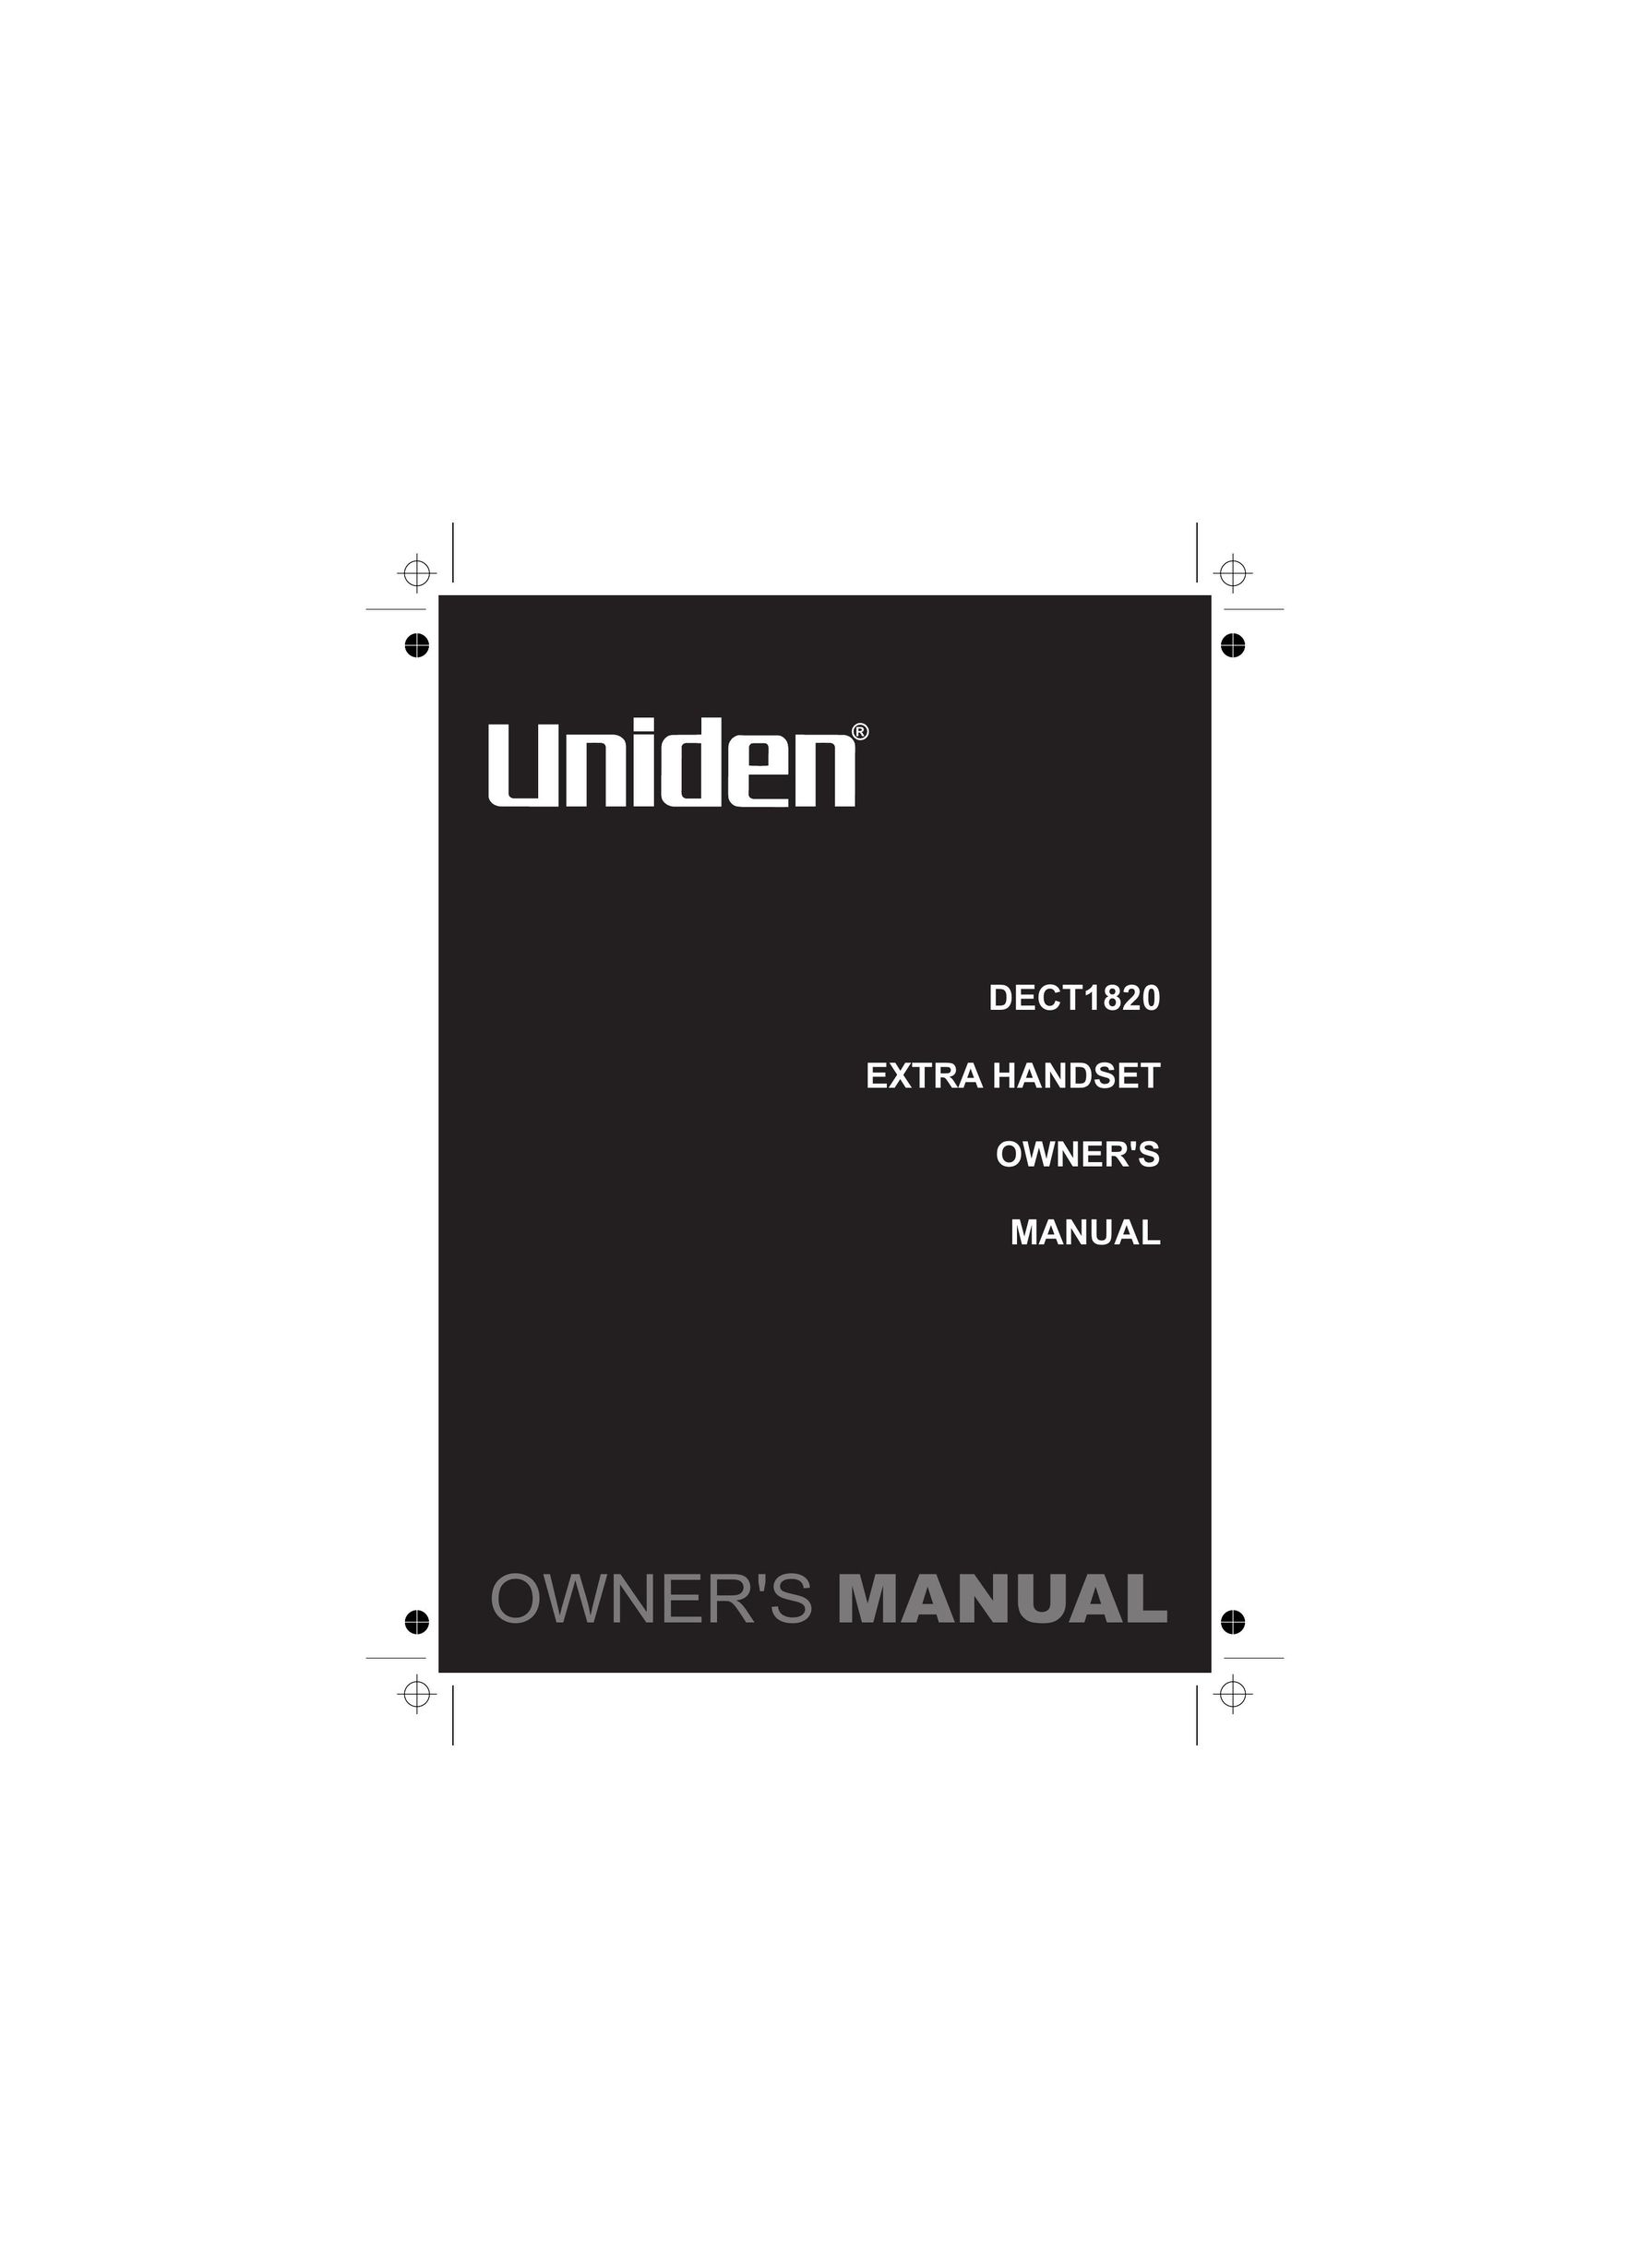 Uniden DECT1820 Telephone User Manual